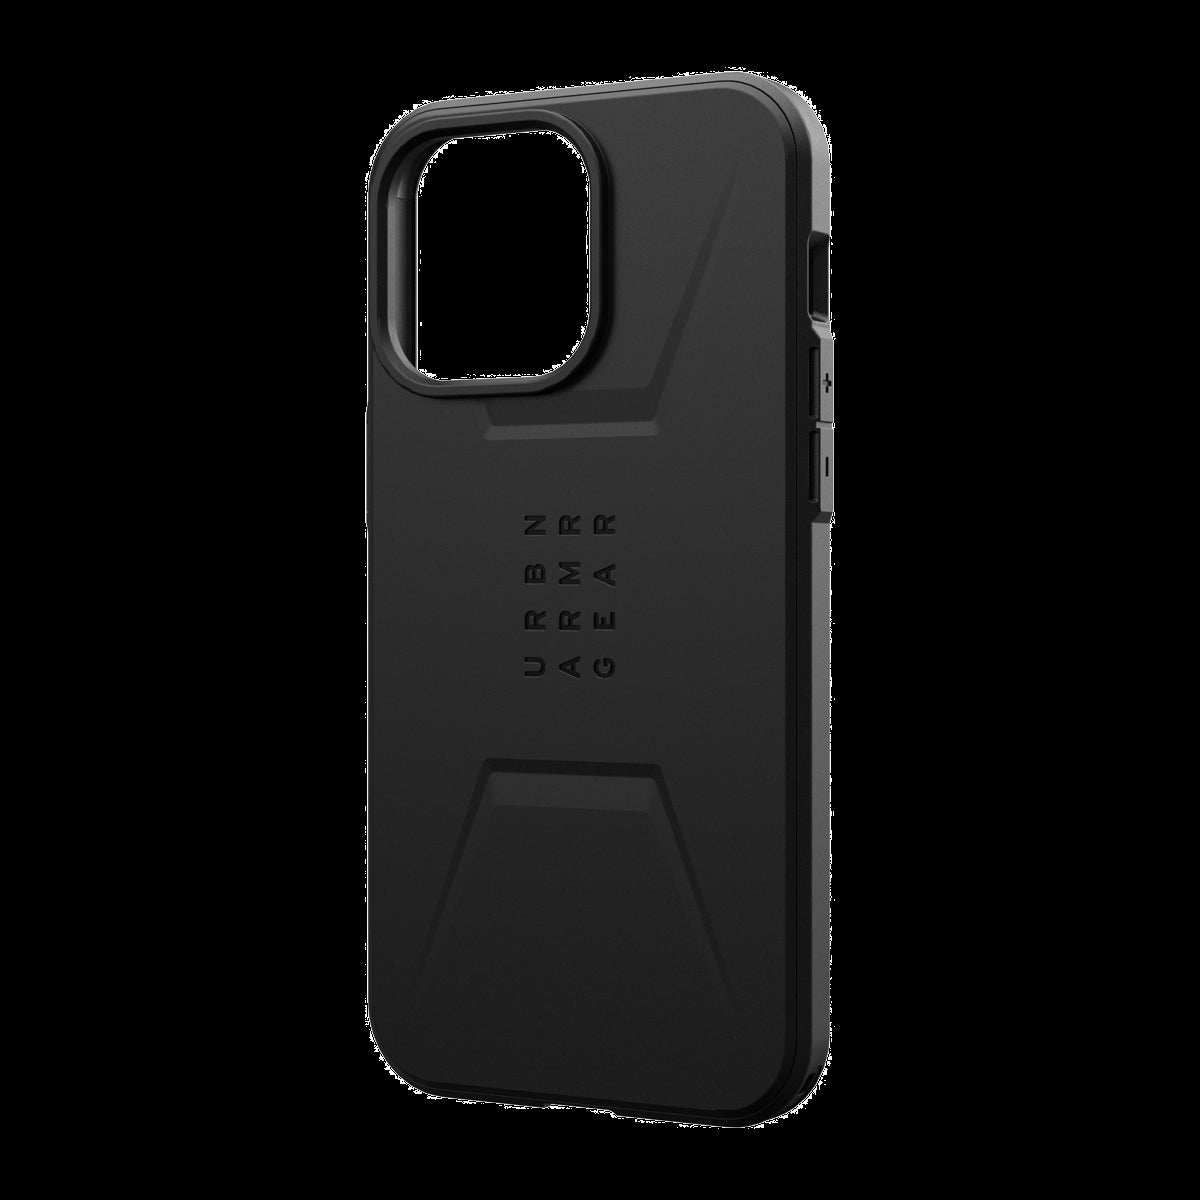 The modern yet rugged UAG Civilian case features shock absorbing construction in a lightweight design that is compatible with MagSafe charging.